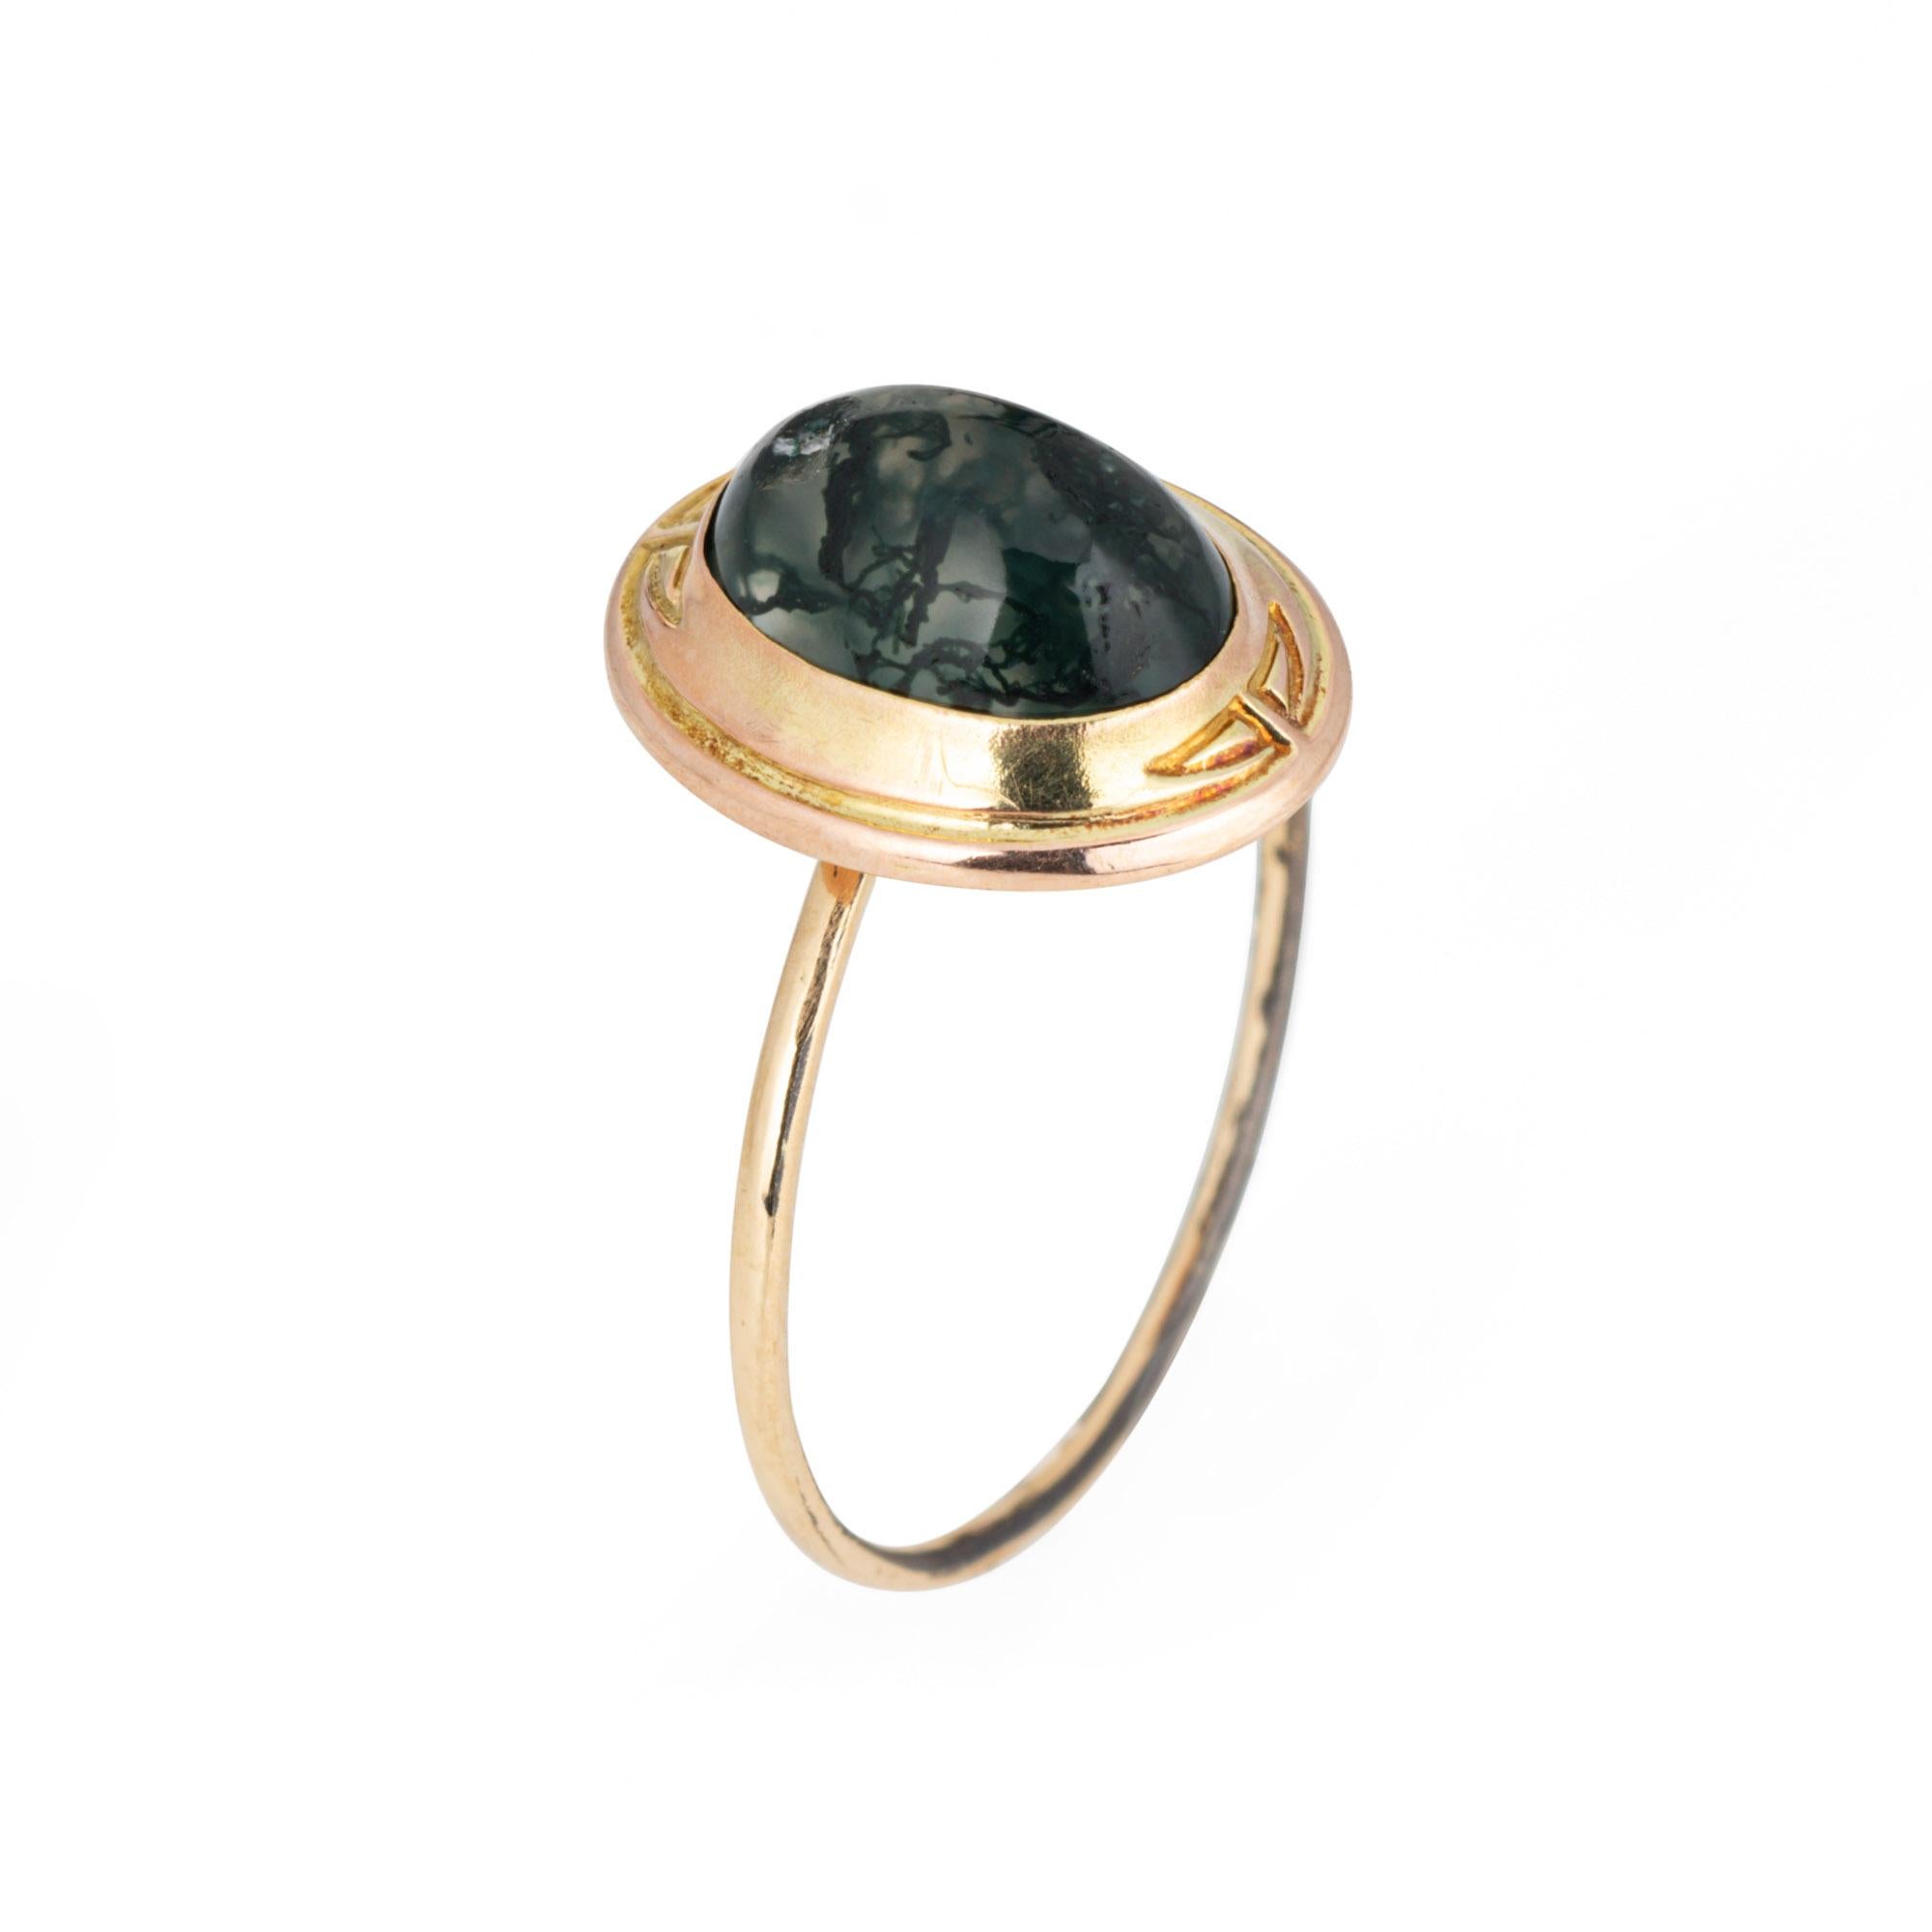 Originally an antique Victorian era stick pin (circa 1880s to 1900s), the moss agate ring is crafted in 14 karat yellow gold.

The ring is mounted with the original stick pin. Our jeweler rounded the stick pin into a slim band for the finger. The